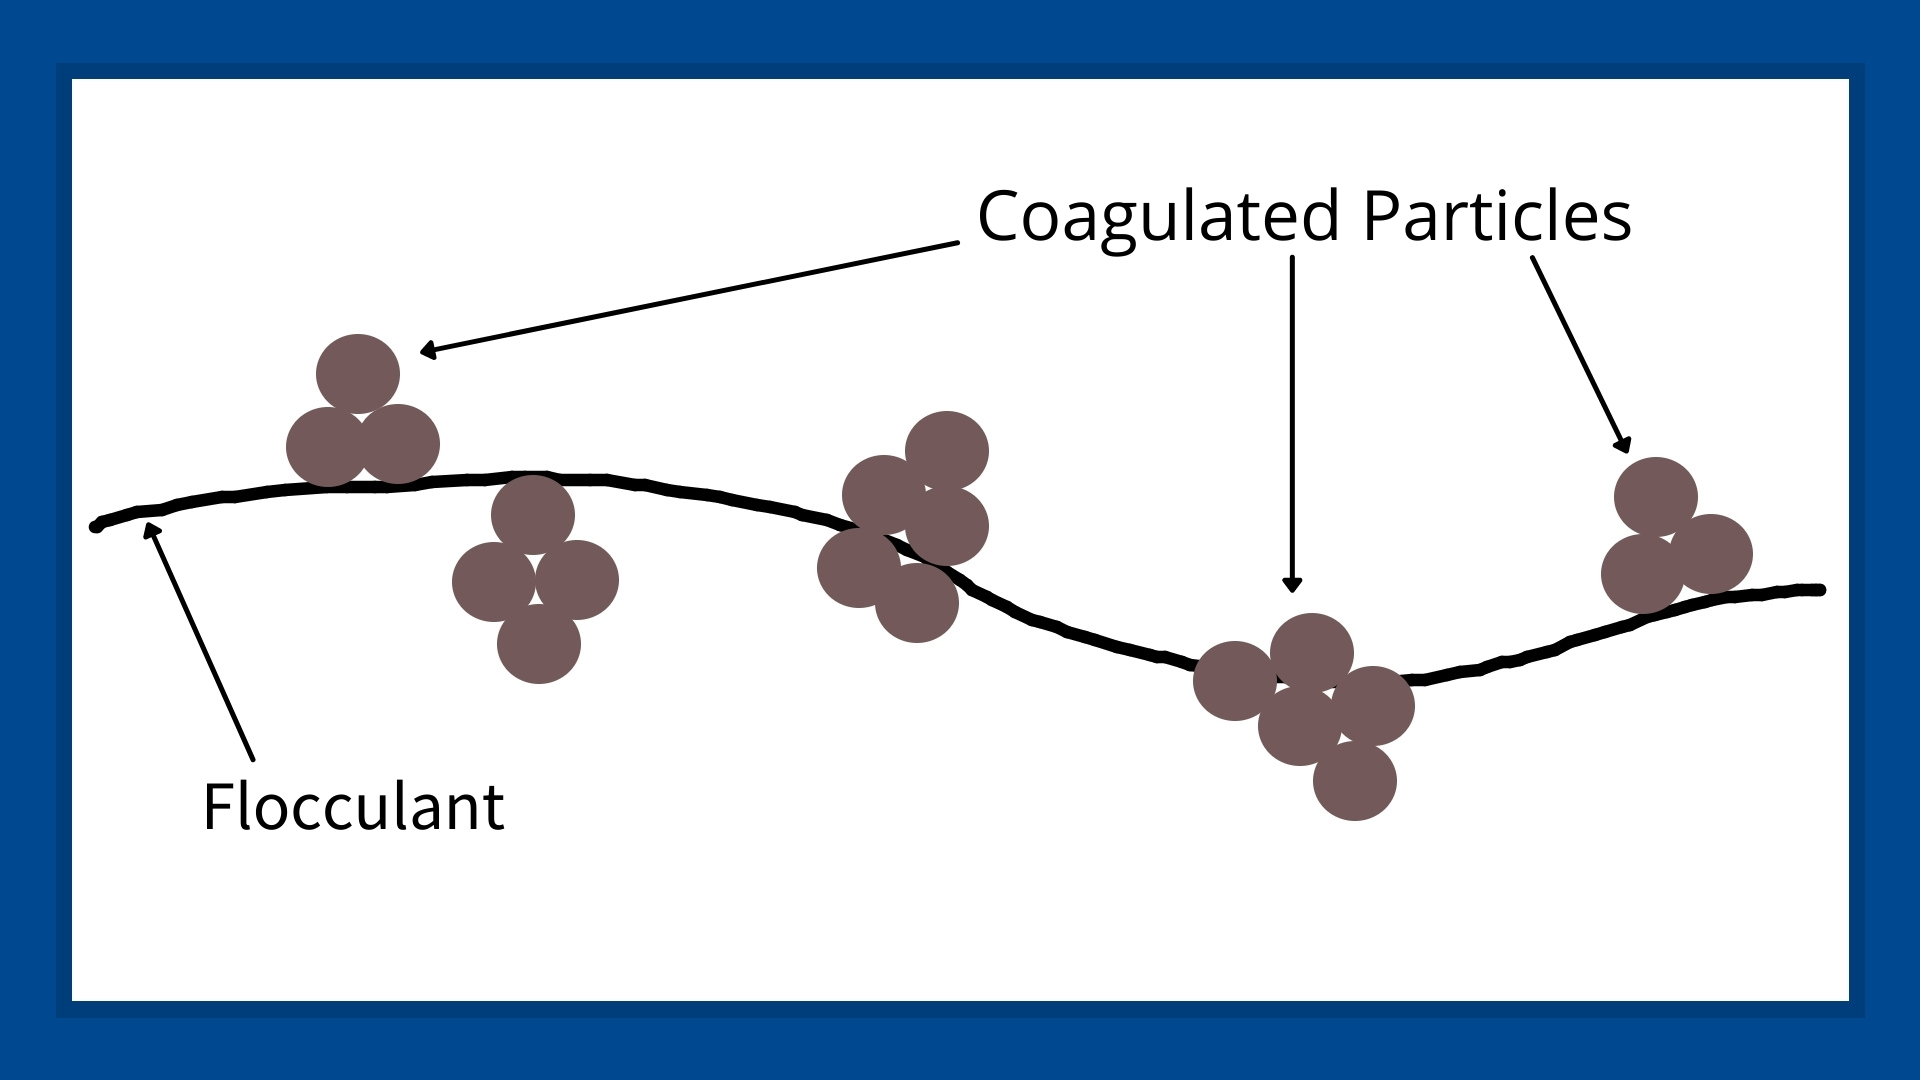 This image shows the coagulated particles being pulled together by a flocculant to form larger particles.